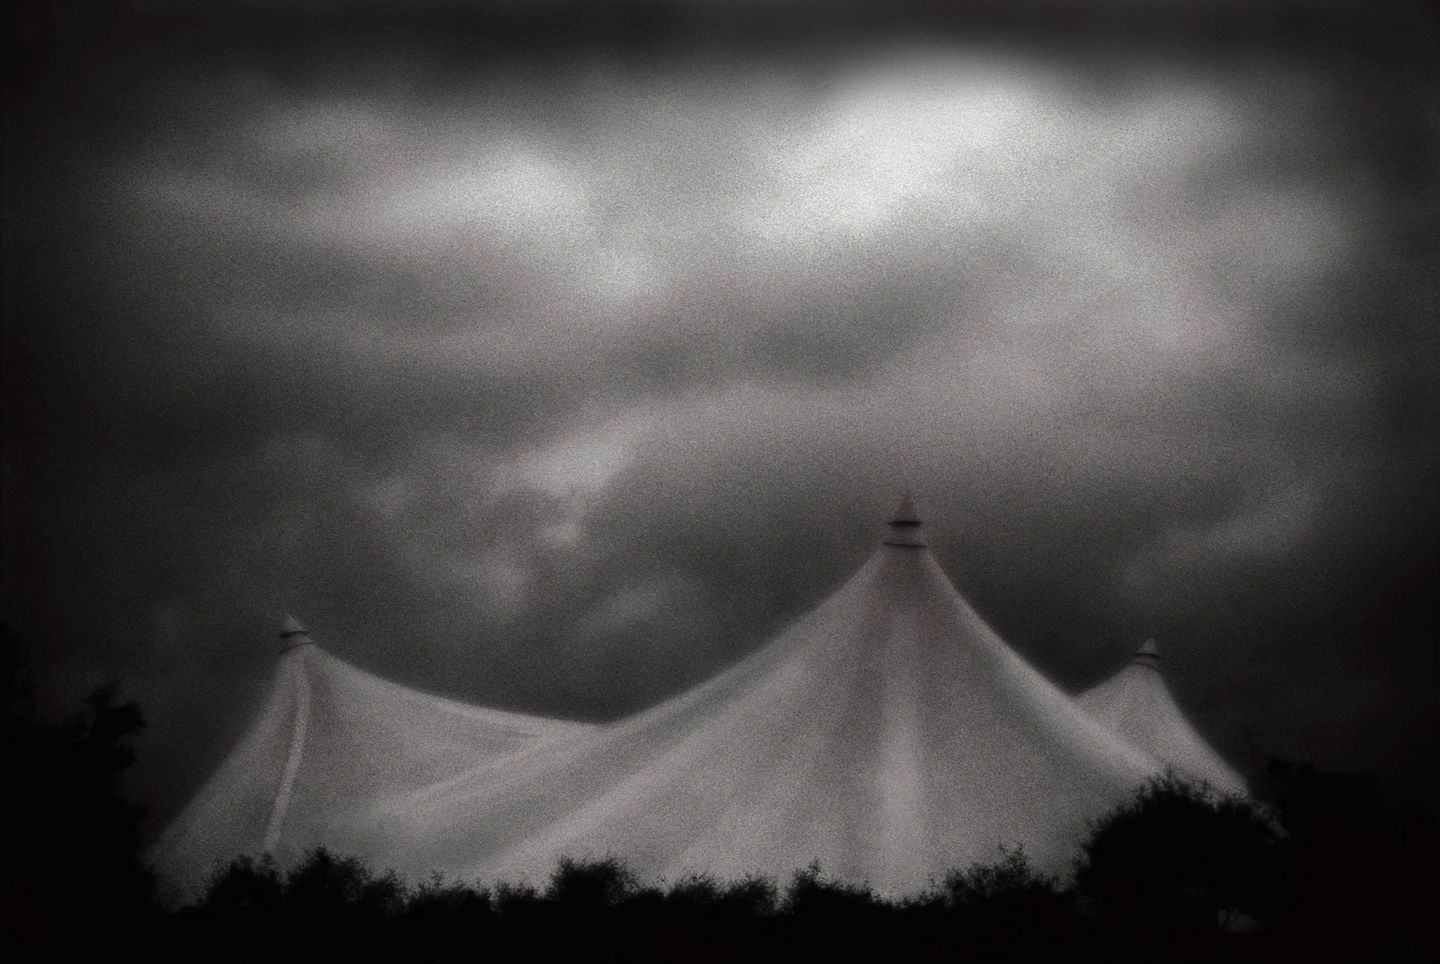 A tent in the middle of nowhere under dark clouds.